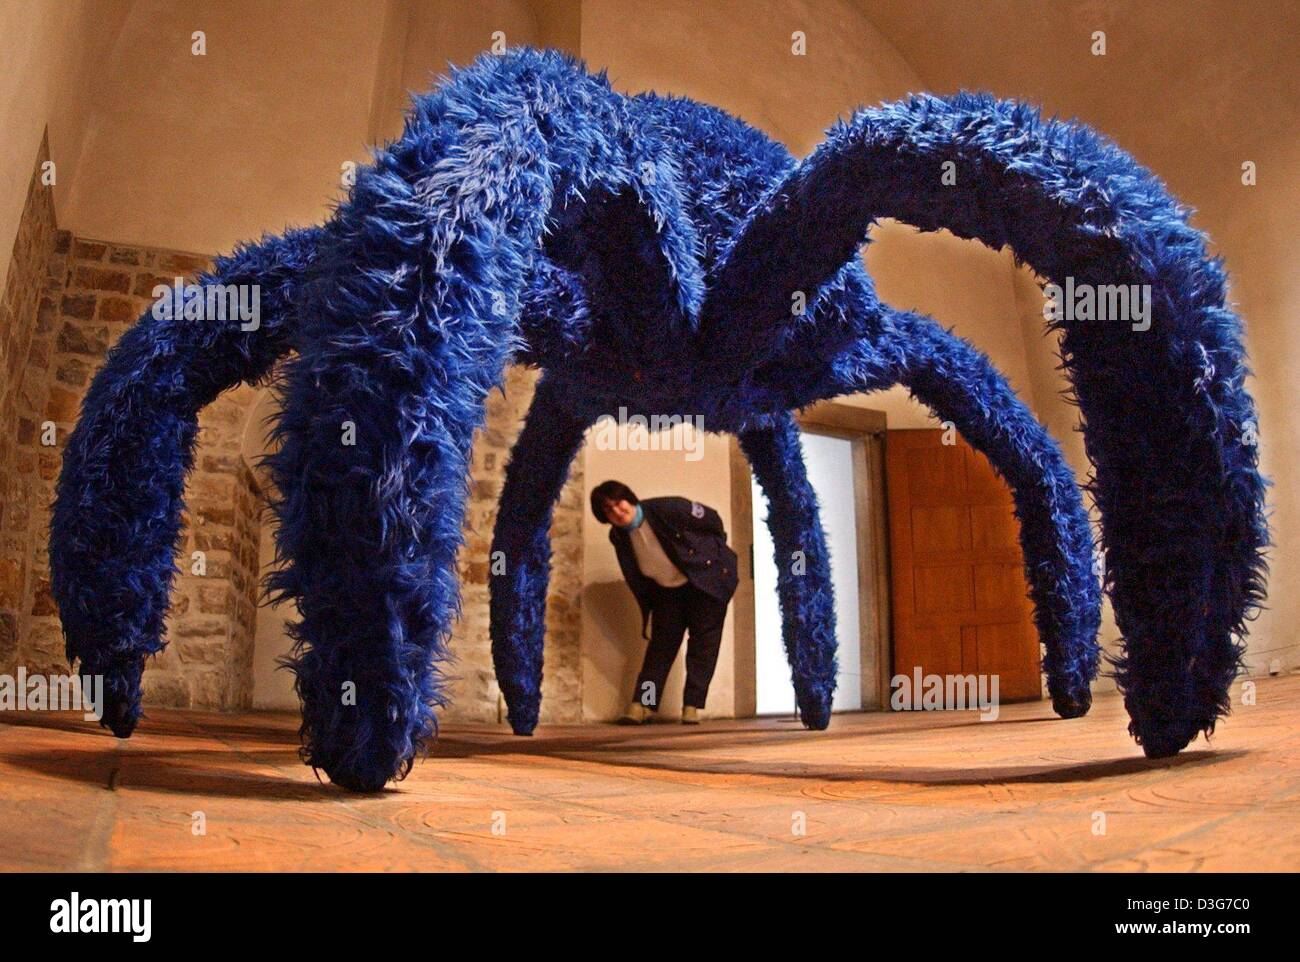 (dpa) - A 'blue widow spider' is the artwork by artist Pino Pascall during the exhibition 'La Poetica dell Arte Povera' (the poetics of poor art) at the art museum in Magdeburg, Germany, 1 October 2003. The exhibition shows the current Italian avant-garde 'Arte Povera' (poor art) and runs until 7 December. Stock Photo